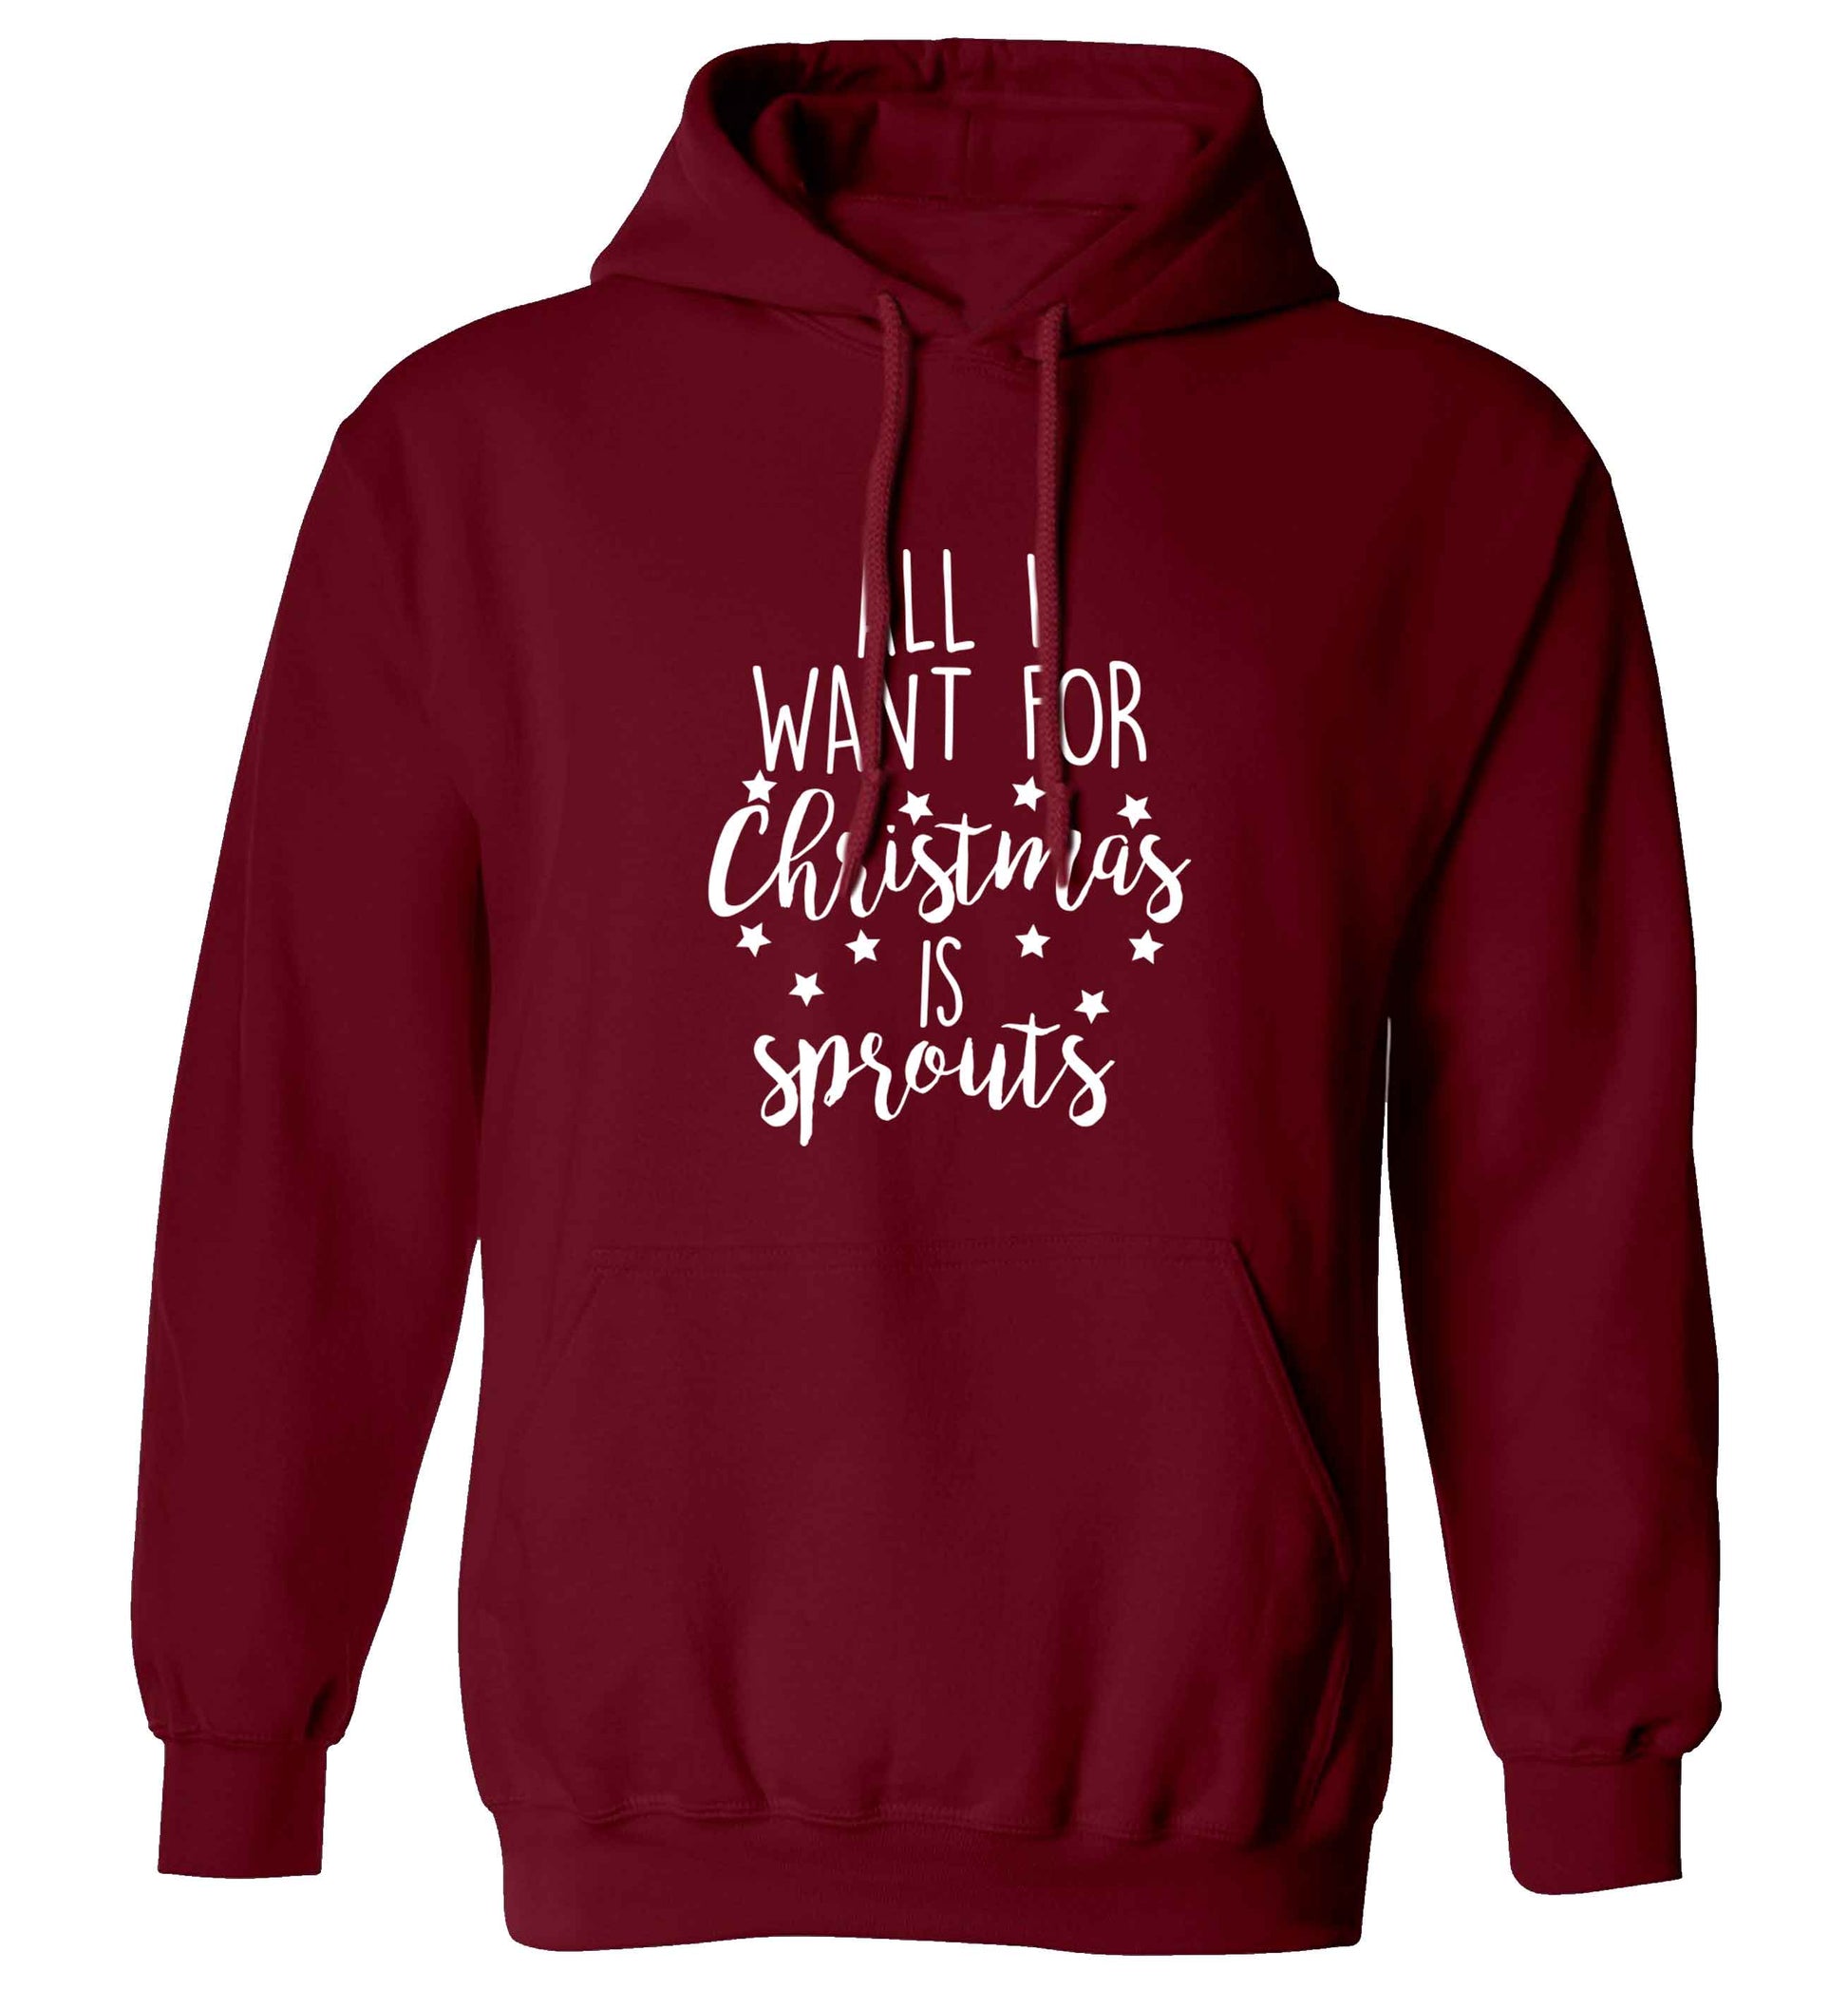 All I want for Christmas is sprouts adults unisex maroon hoodie 2XL